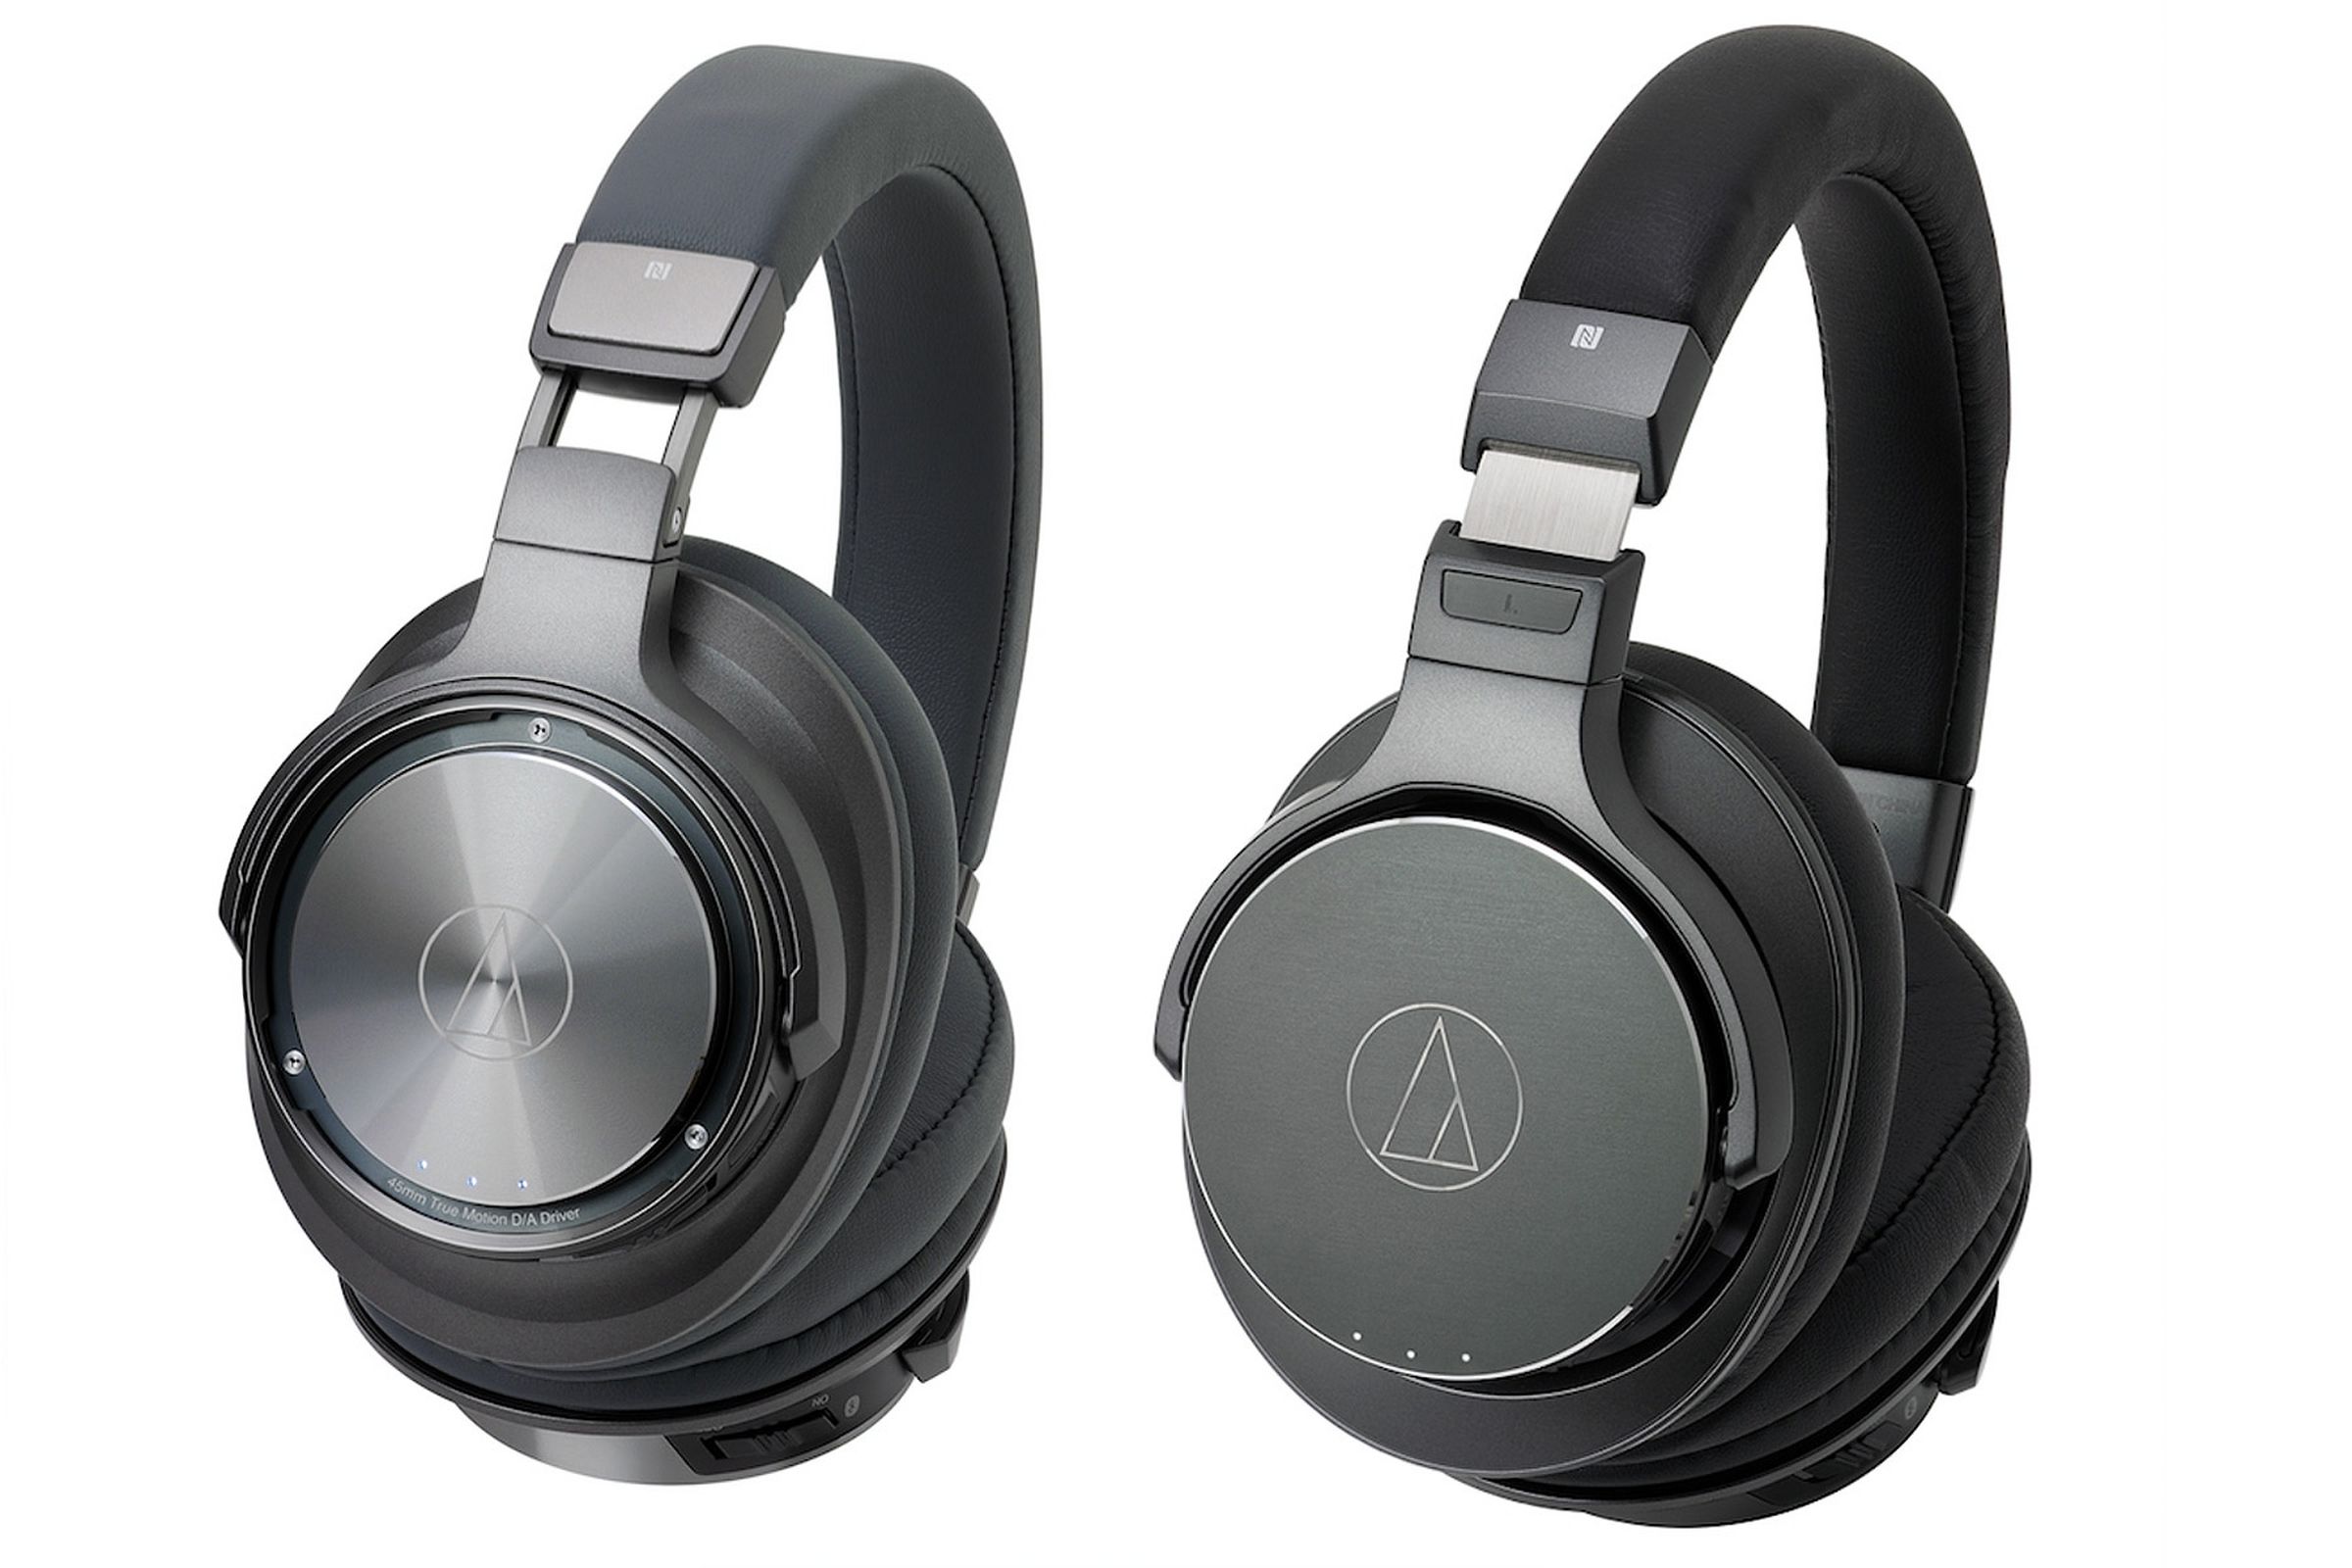 Audio-Technica DSR9BT, on the left, and DSR7BT, on the right